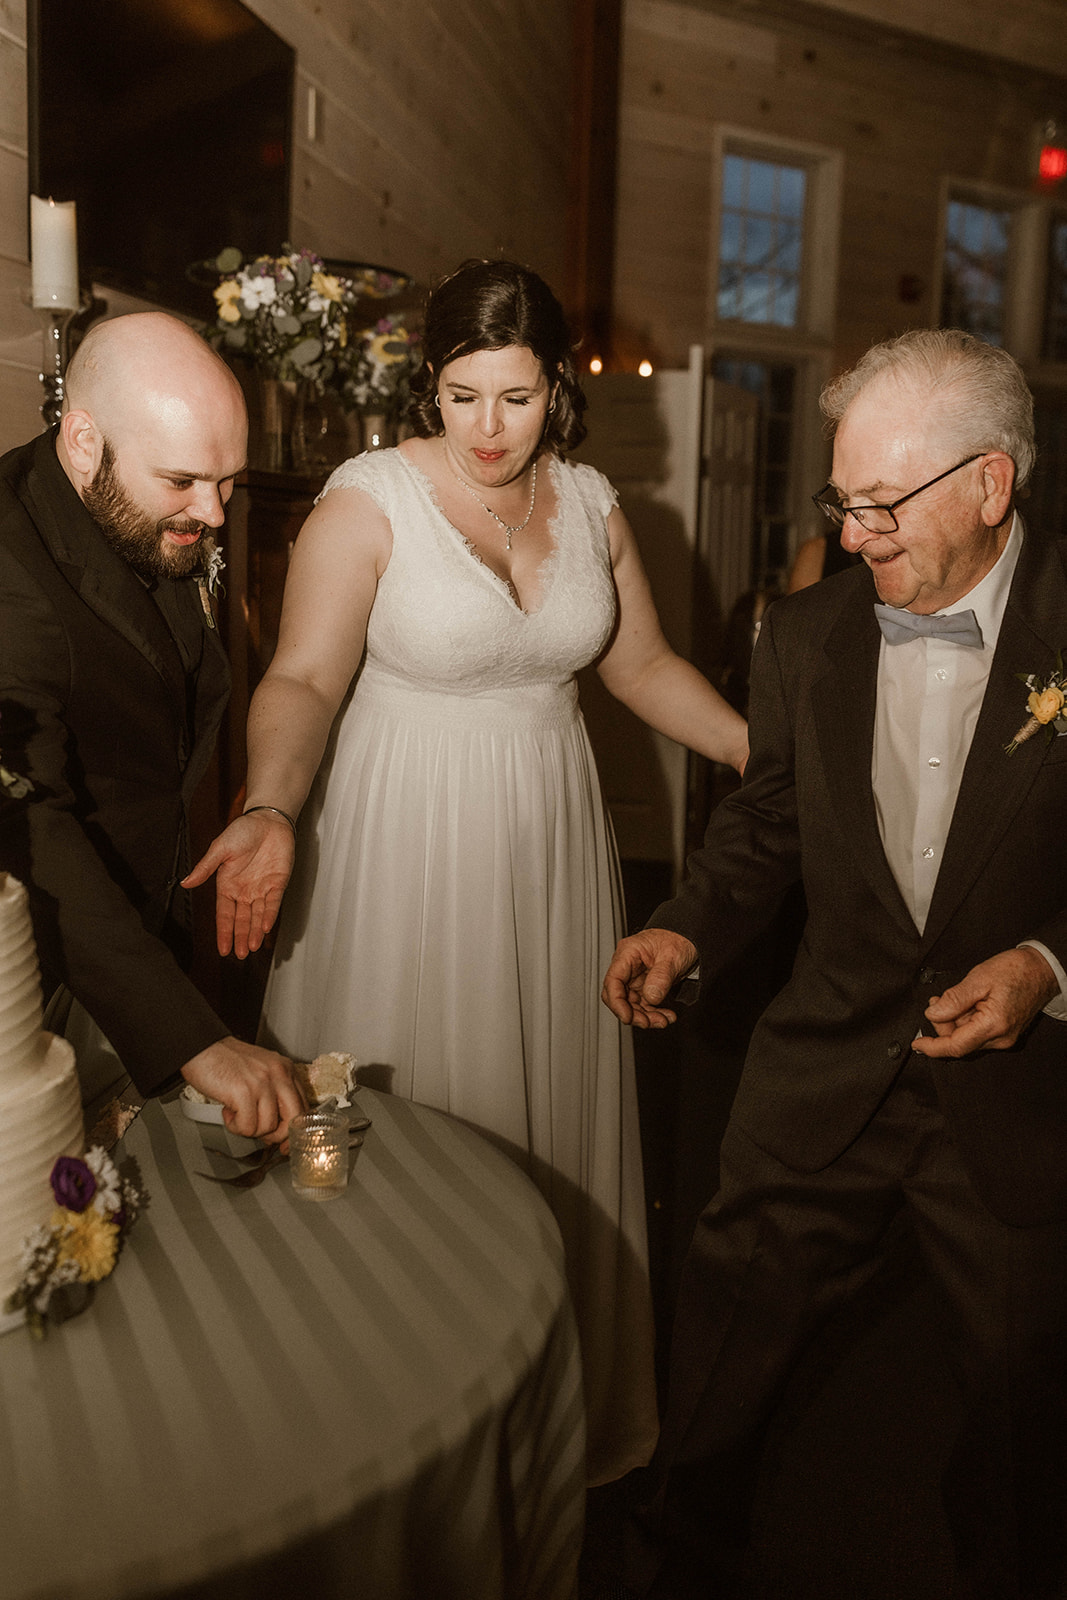 Wedding guest helps bride with her piece of cake during her dreamy wedding day